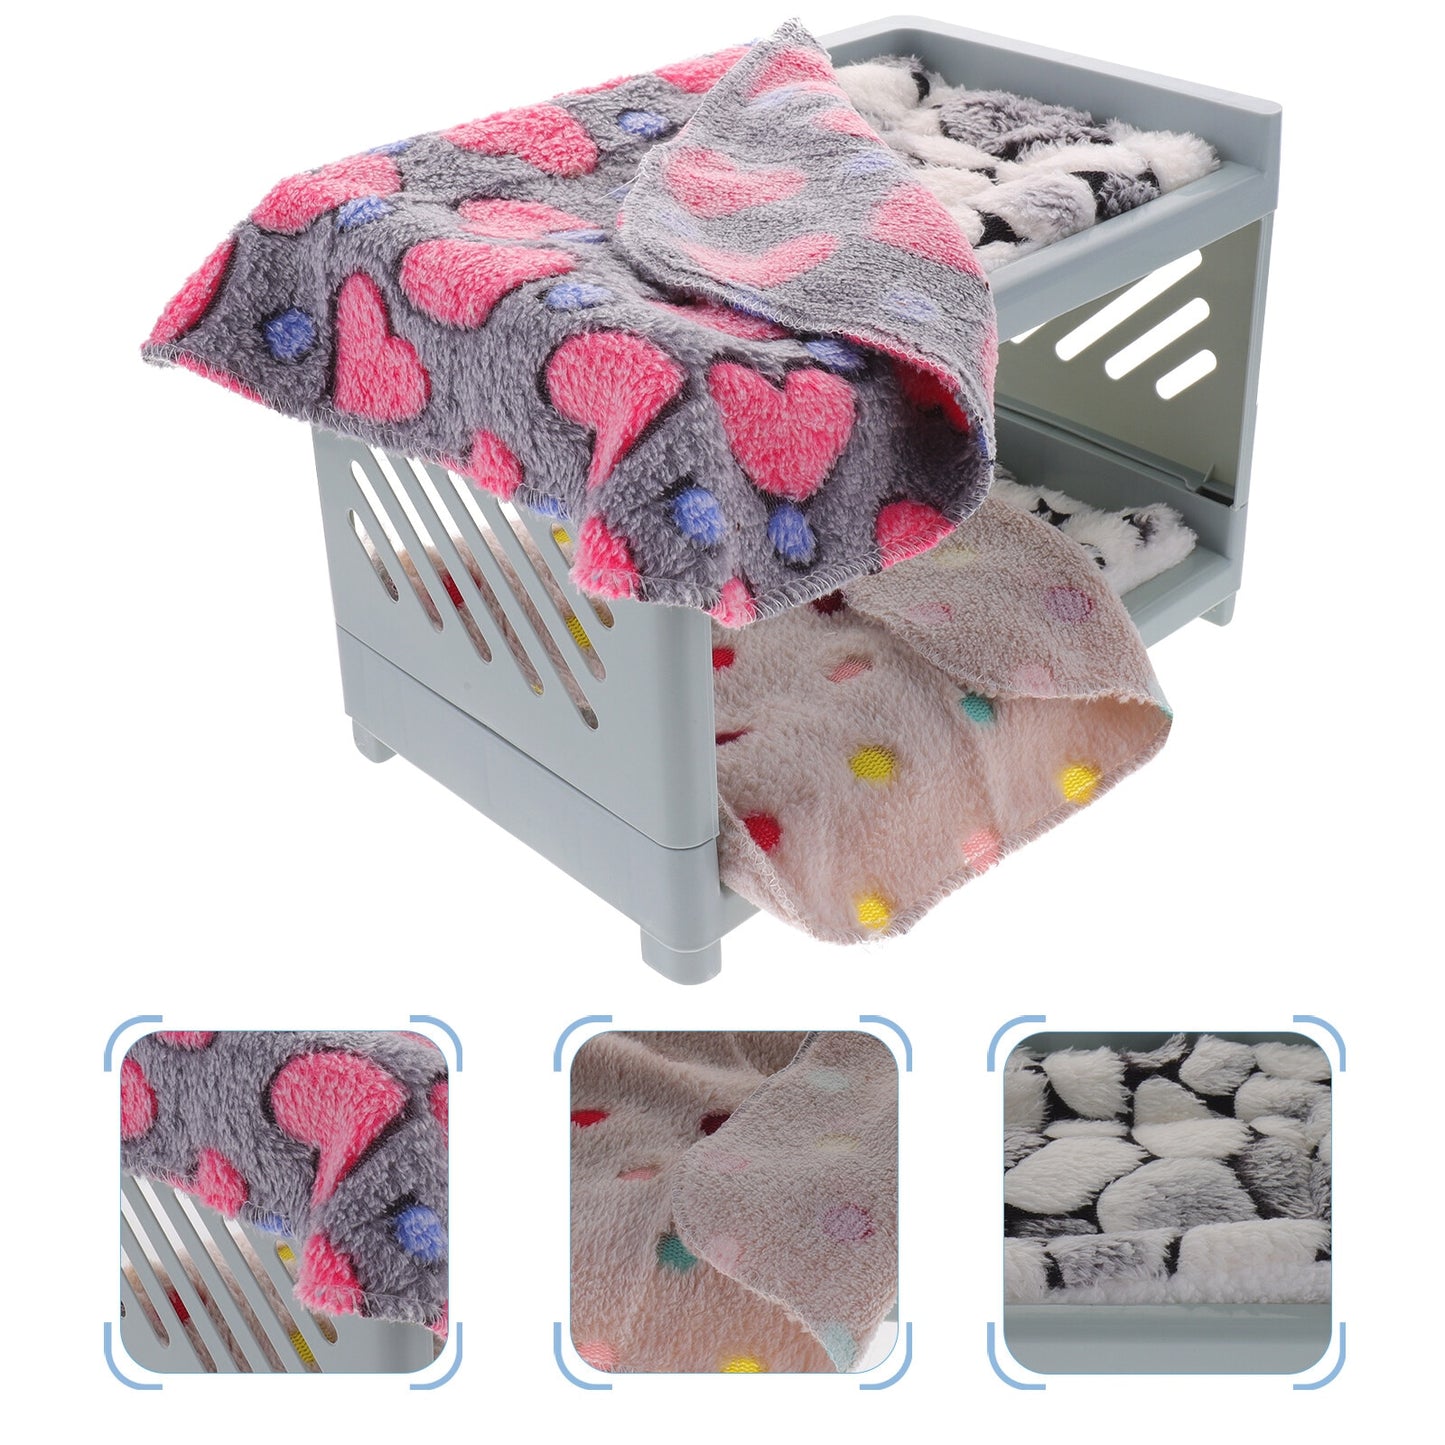 Rabbit Supplies Comfortable Hamster Bed Nest Multi-function Bunny Convenient Double-layer